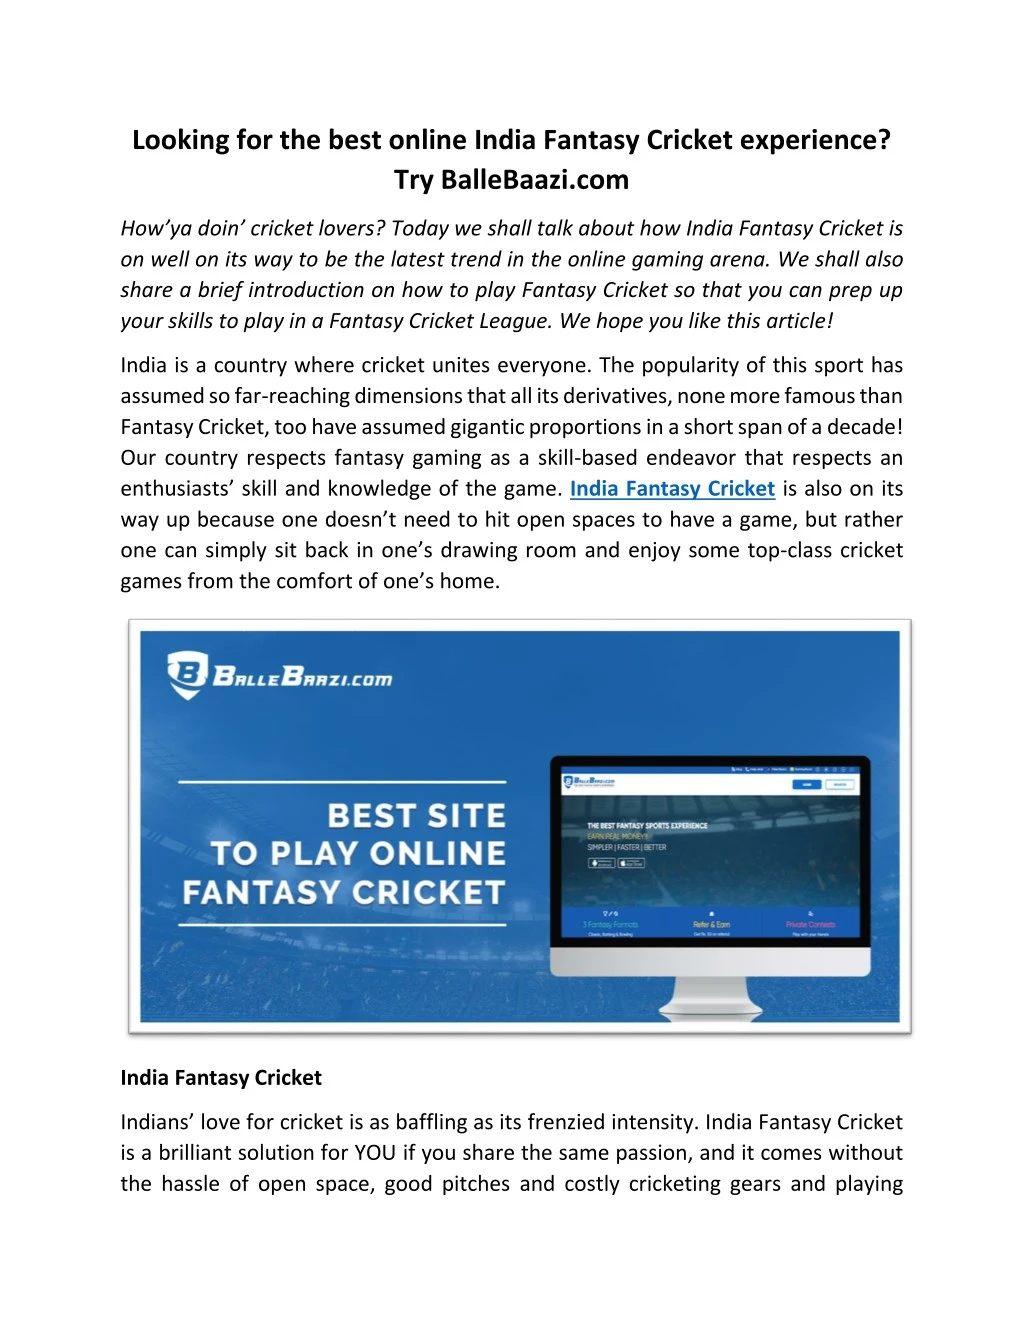 looking for the best online india fantasy cricket